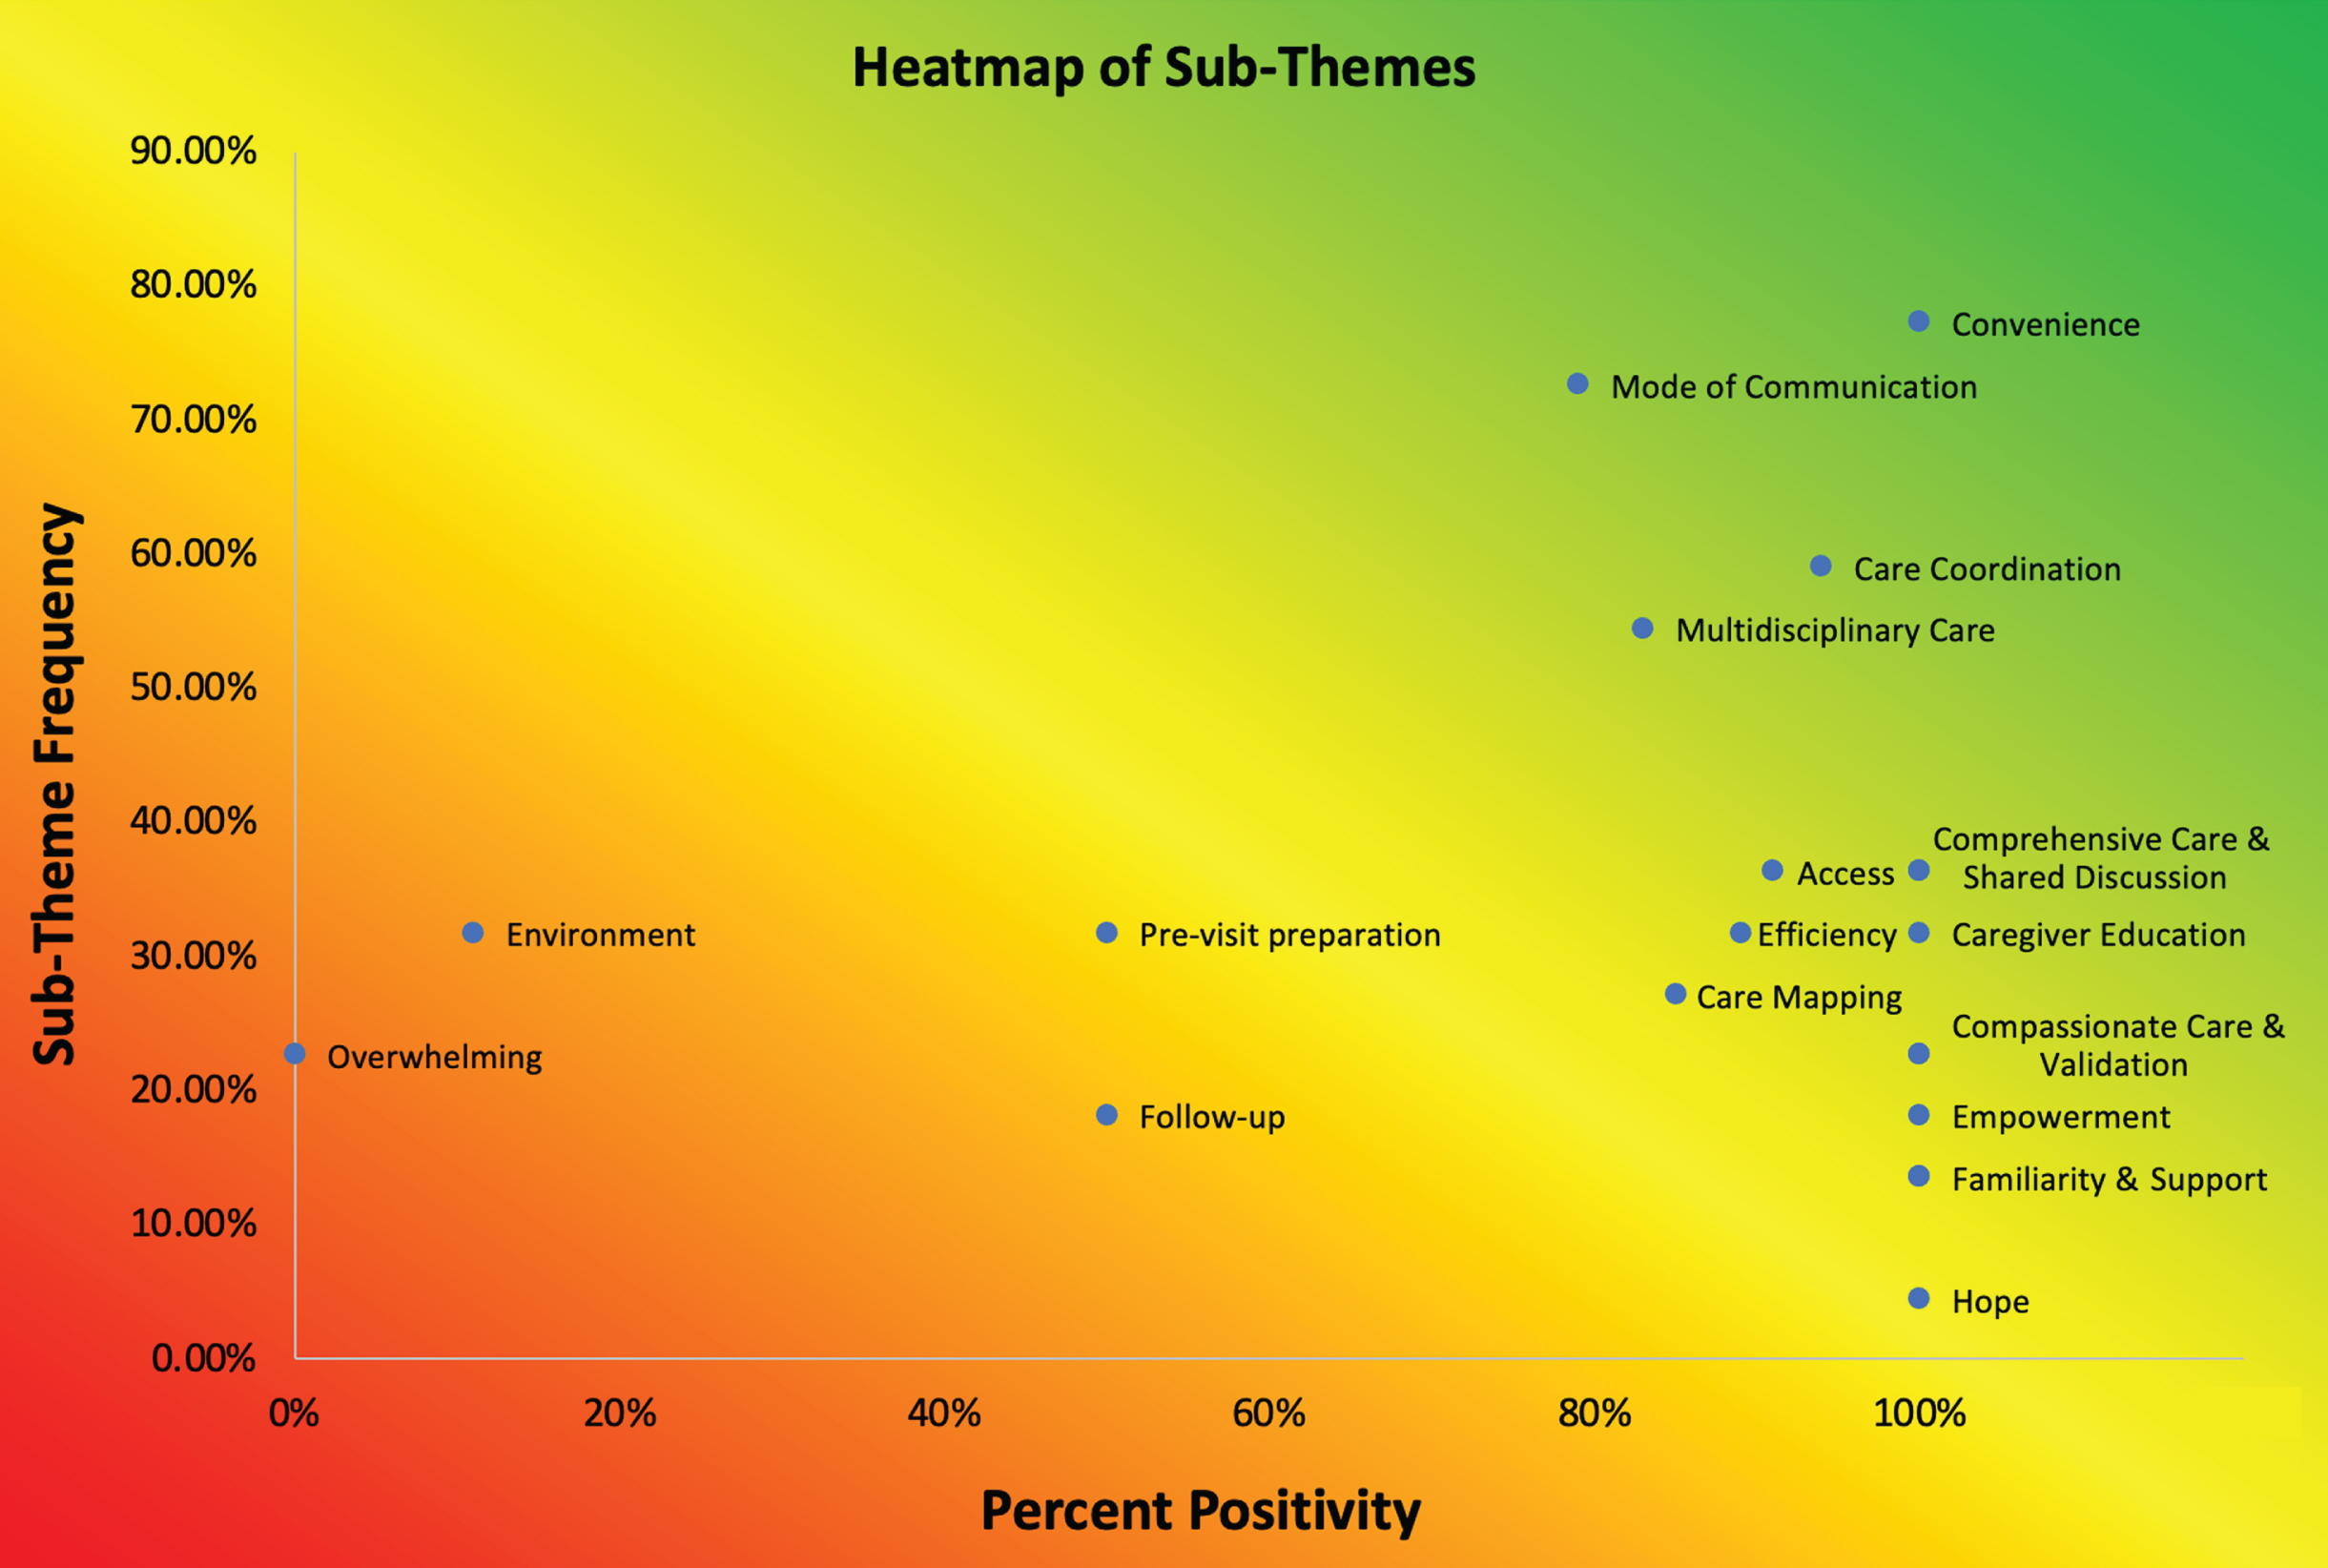 Heatmap of Sub-Themes. Percent positivity (x-axis) denotes the percent of comments about each sub-theme that were positive. Frequency of mention (y-axis) indicates the frequency of caregivers who mentioned each sub-theme.